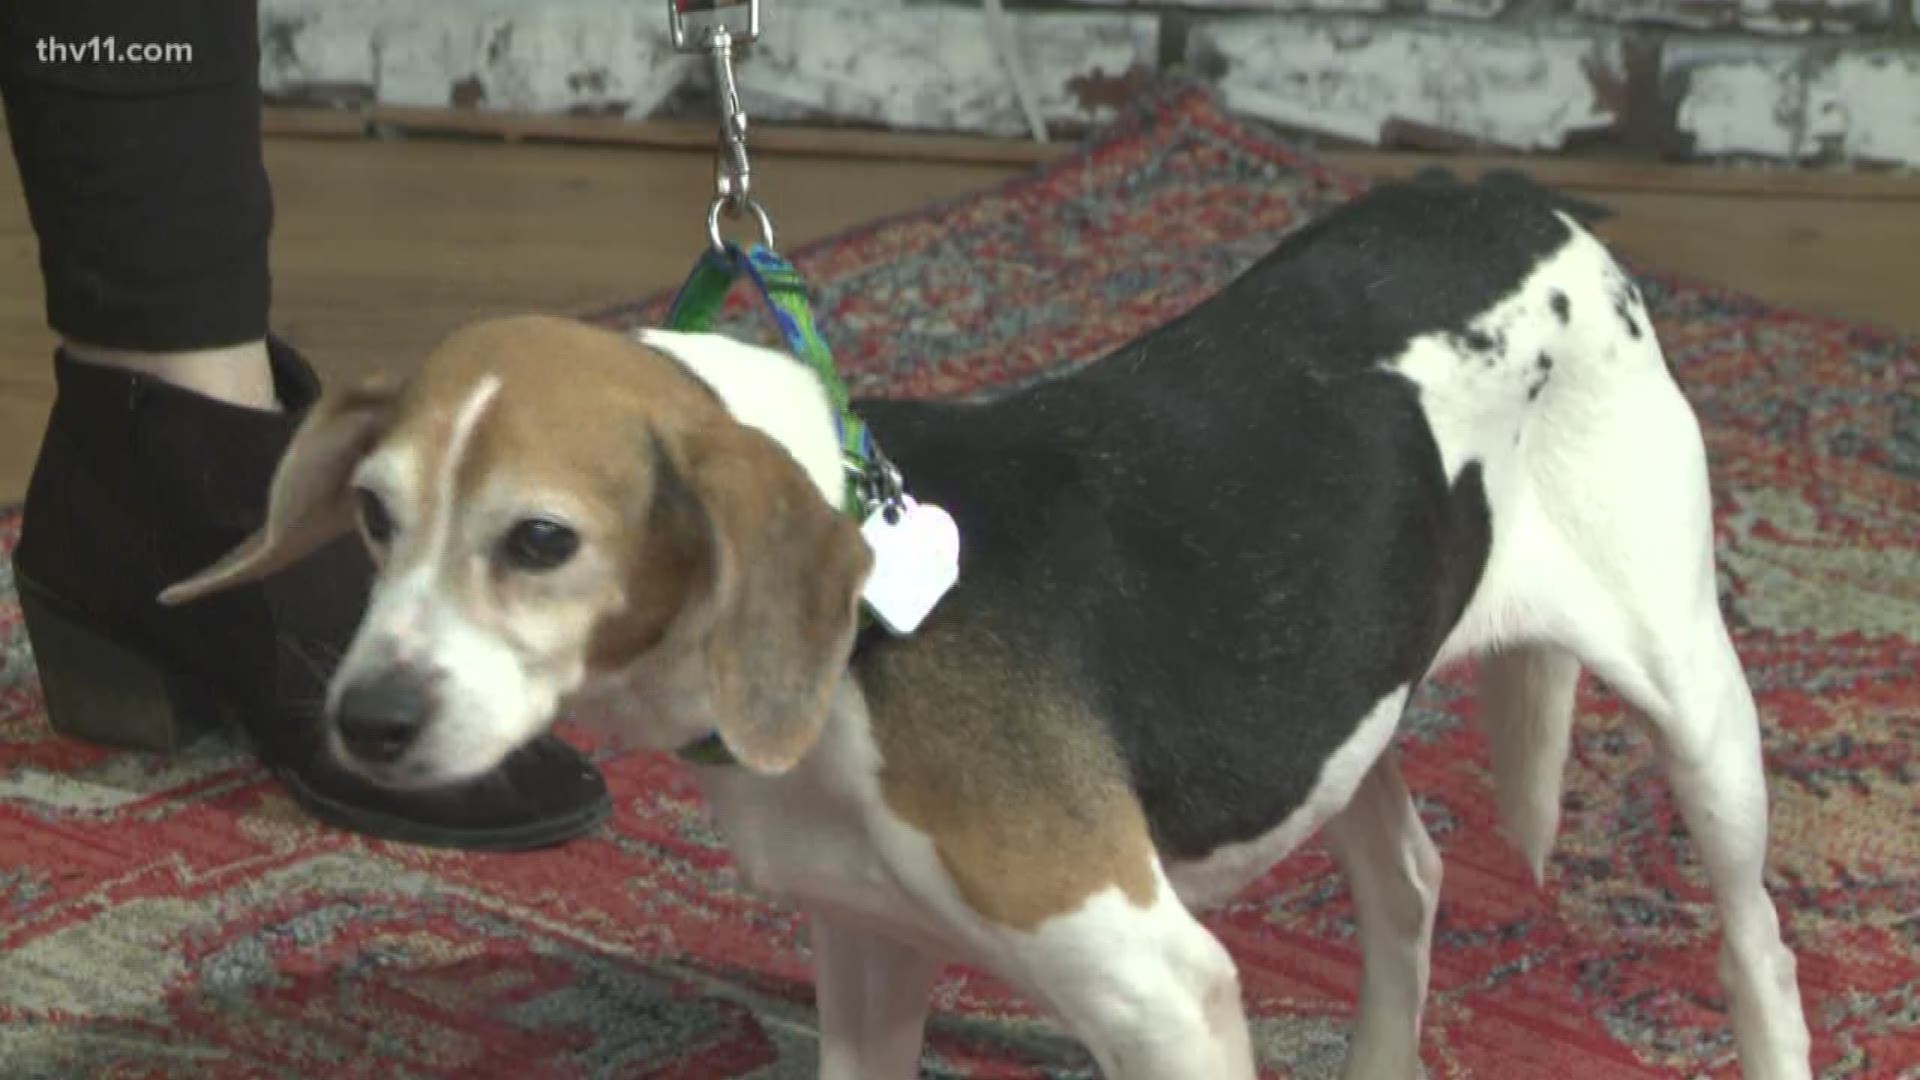 Kinkade is a 7-year-old beagle mix who's still got a lot of life left!